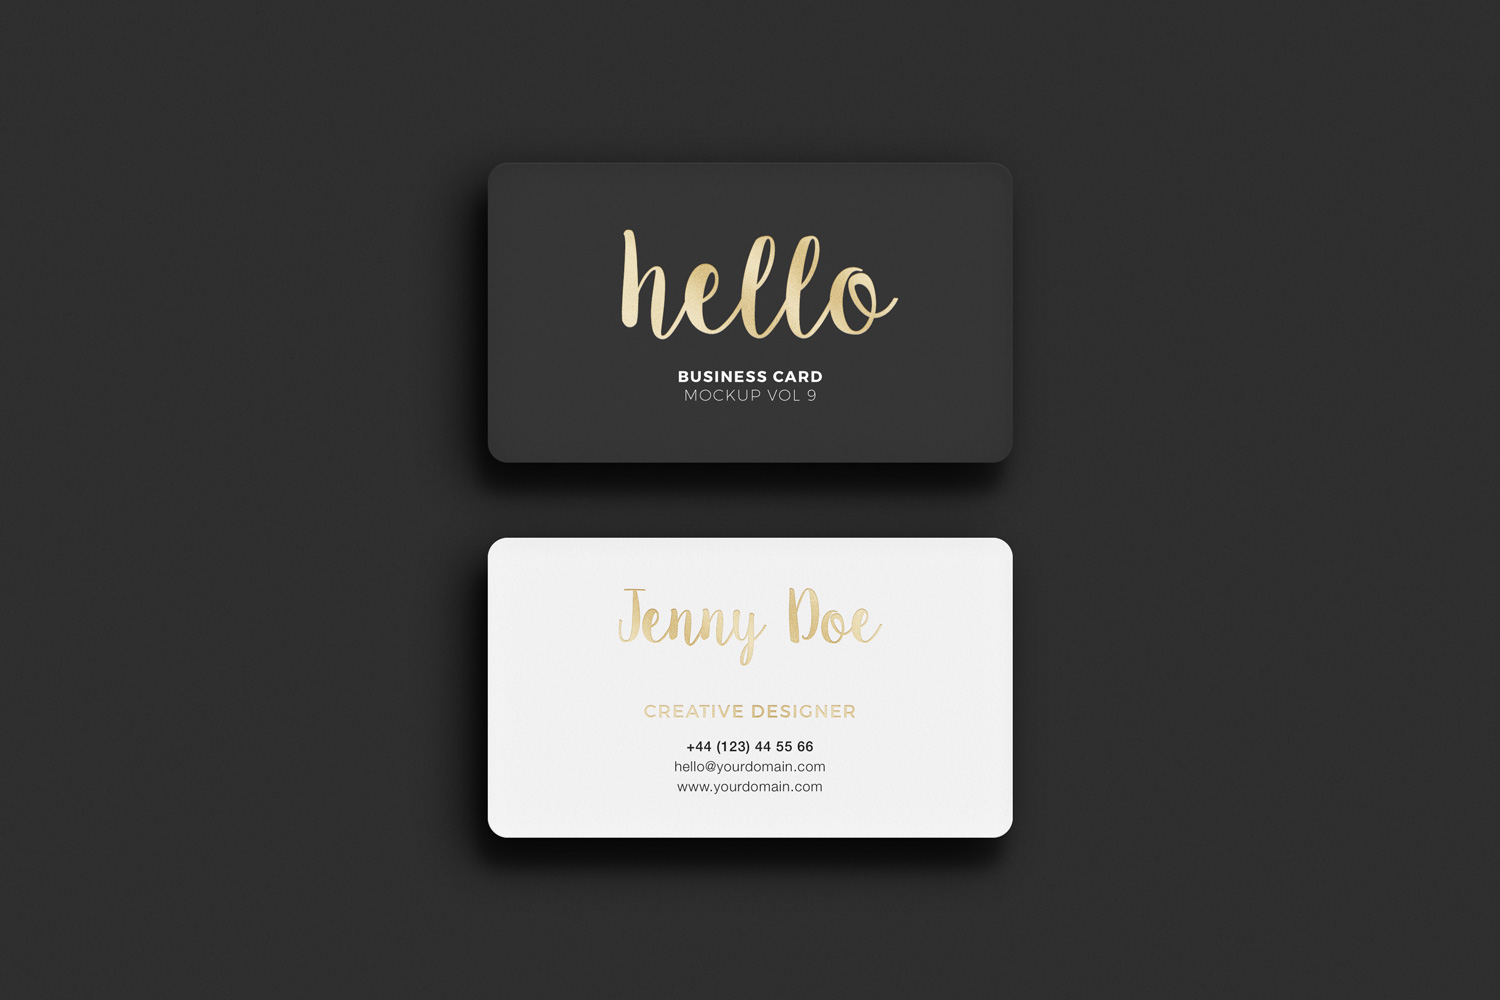 Business Card Rounded Corners Free Mockup 